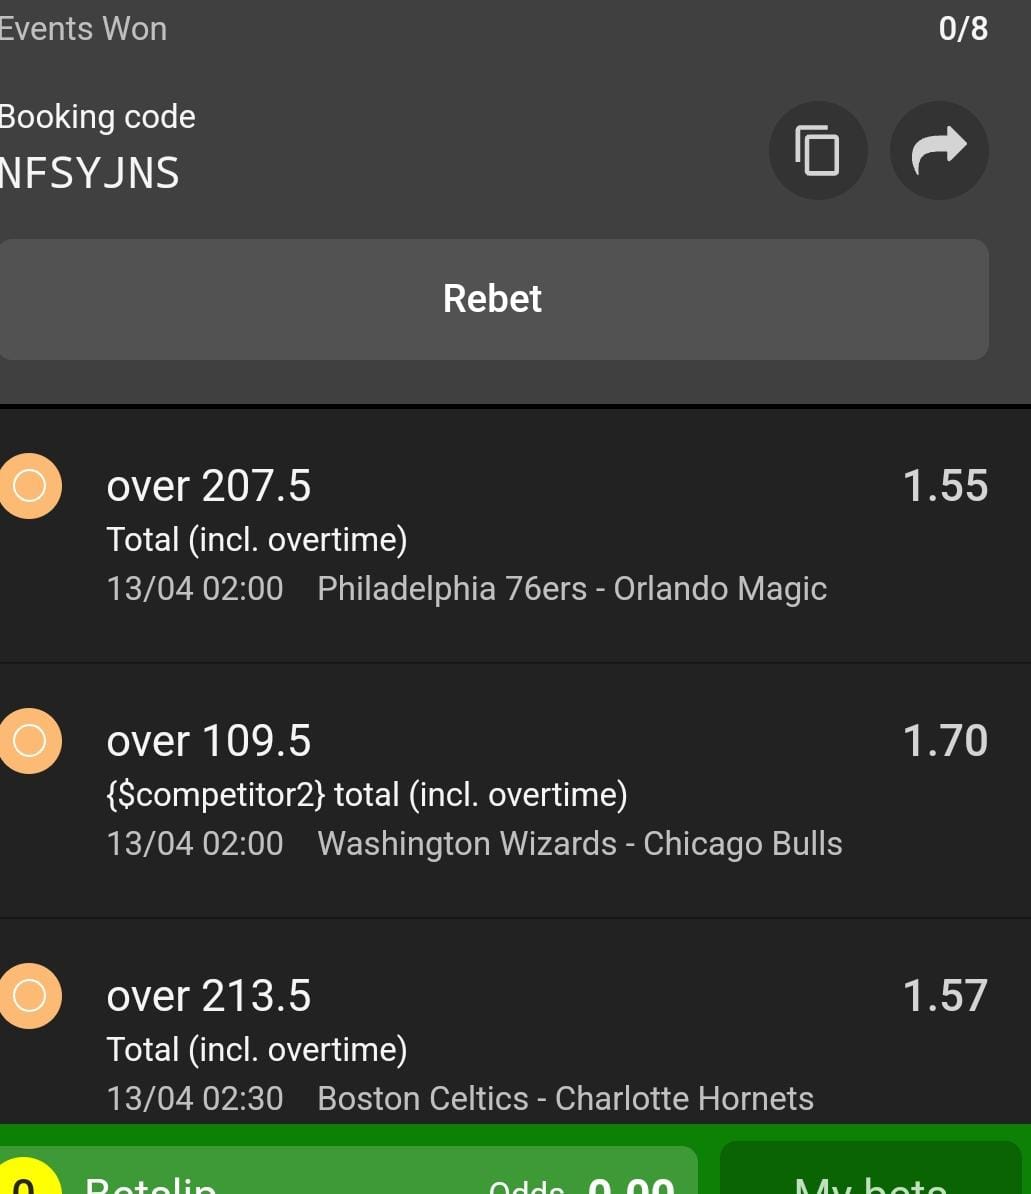 👉TUAMKIE BREAKFAST ..SURE NBA 🏀🏀 ✅53+ Odds . Worthy WIN LINK👉 odibets.com/share/NFSYJNS Tisiikose this ,,FREE Money 💰💰